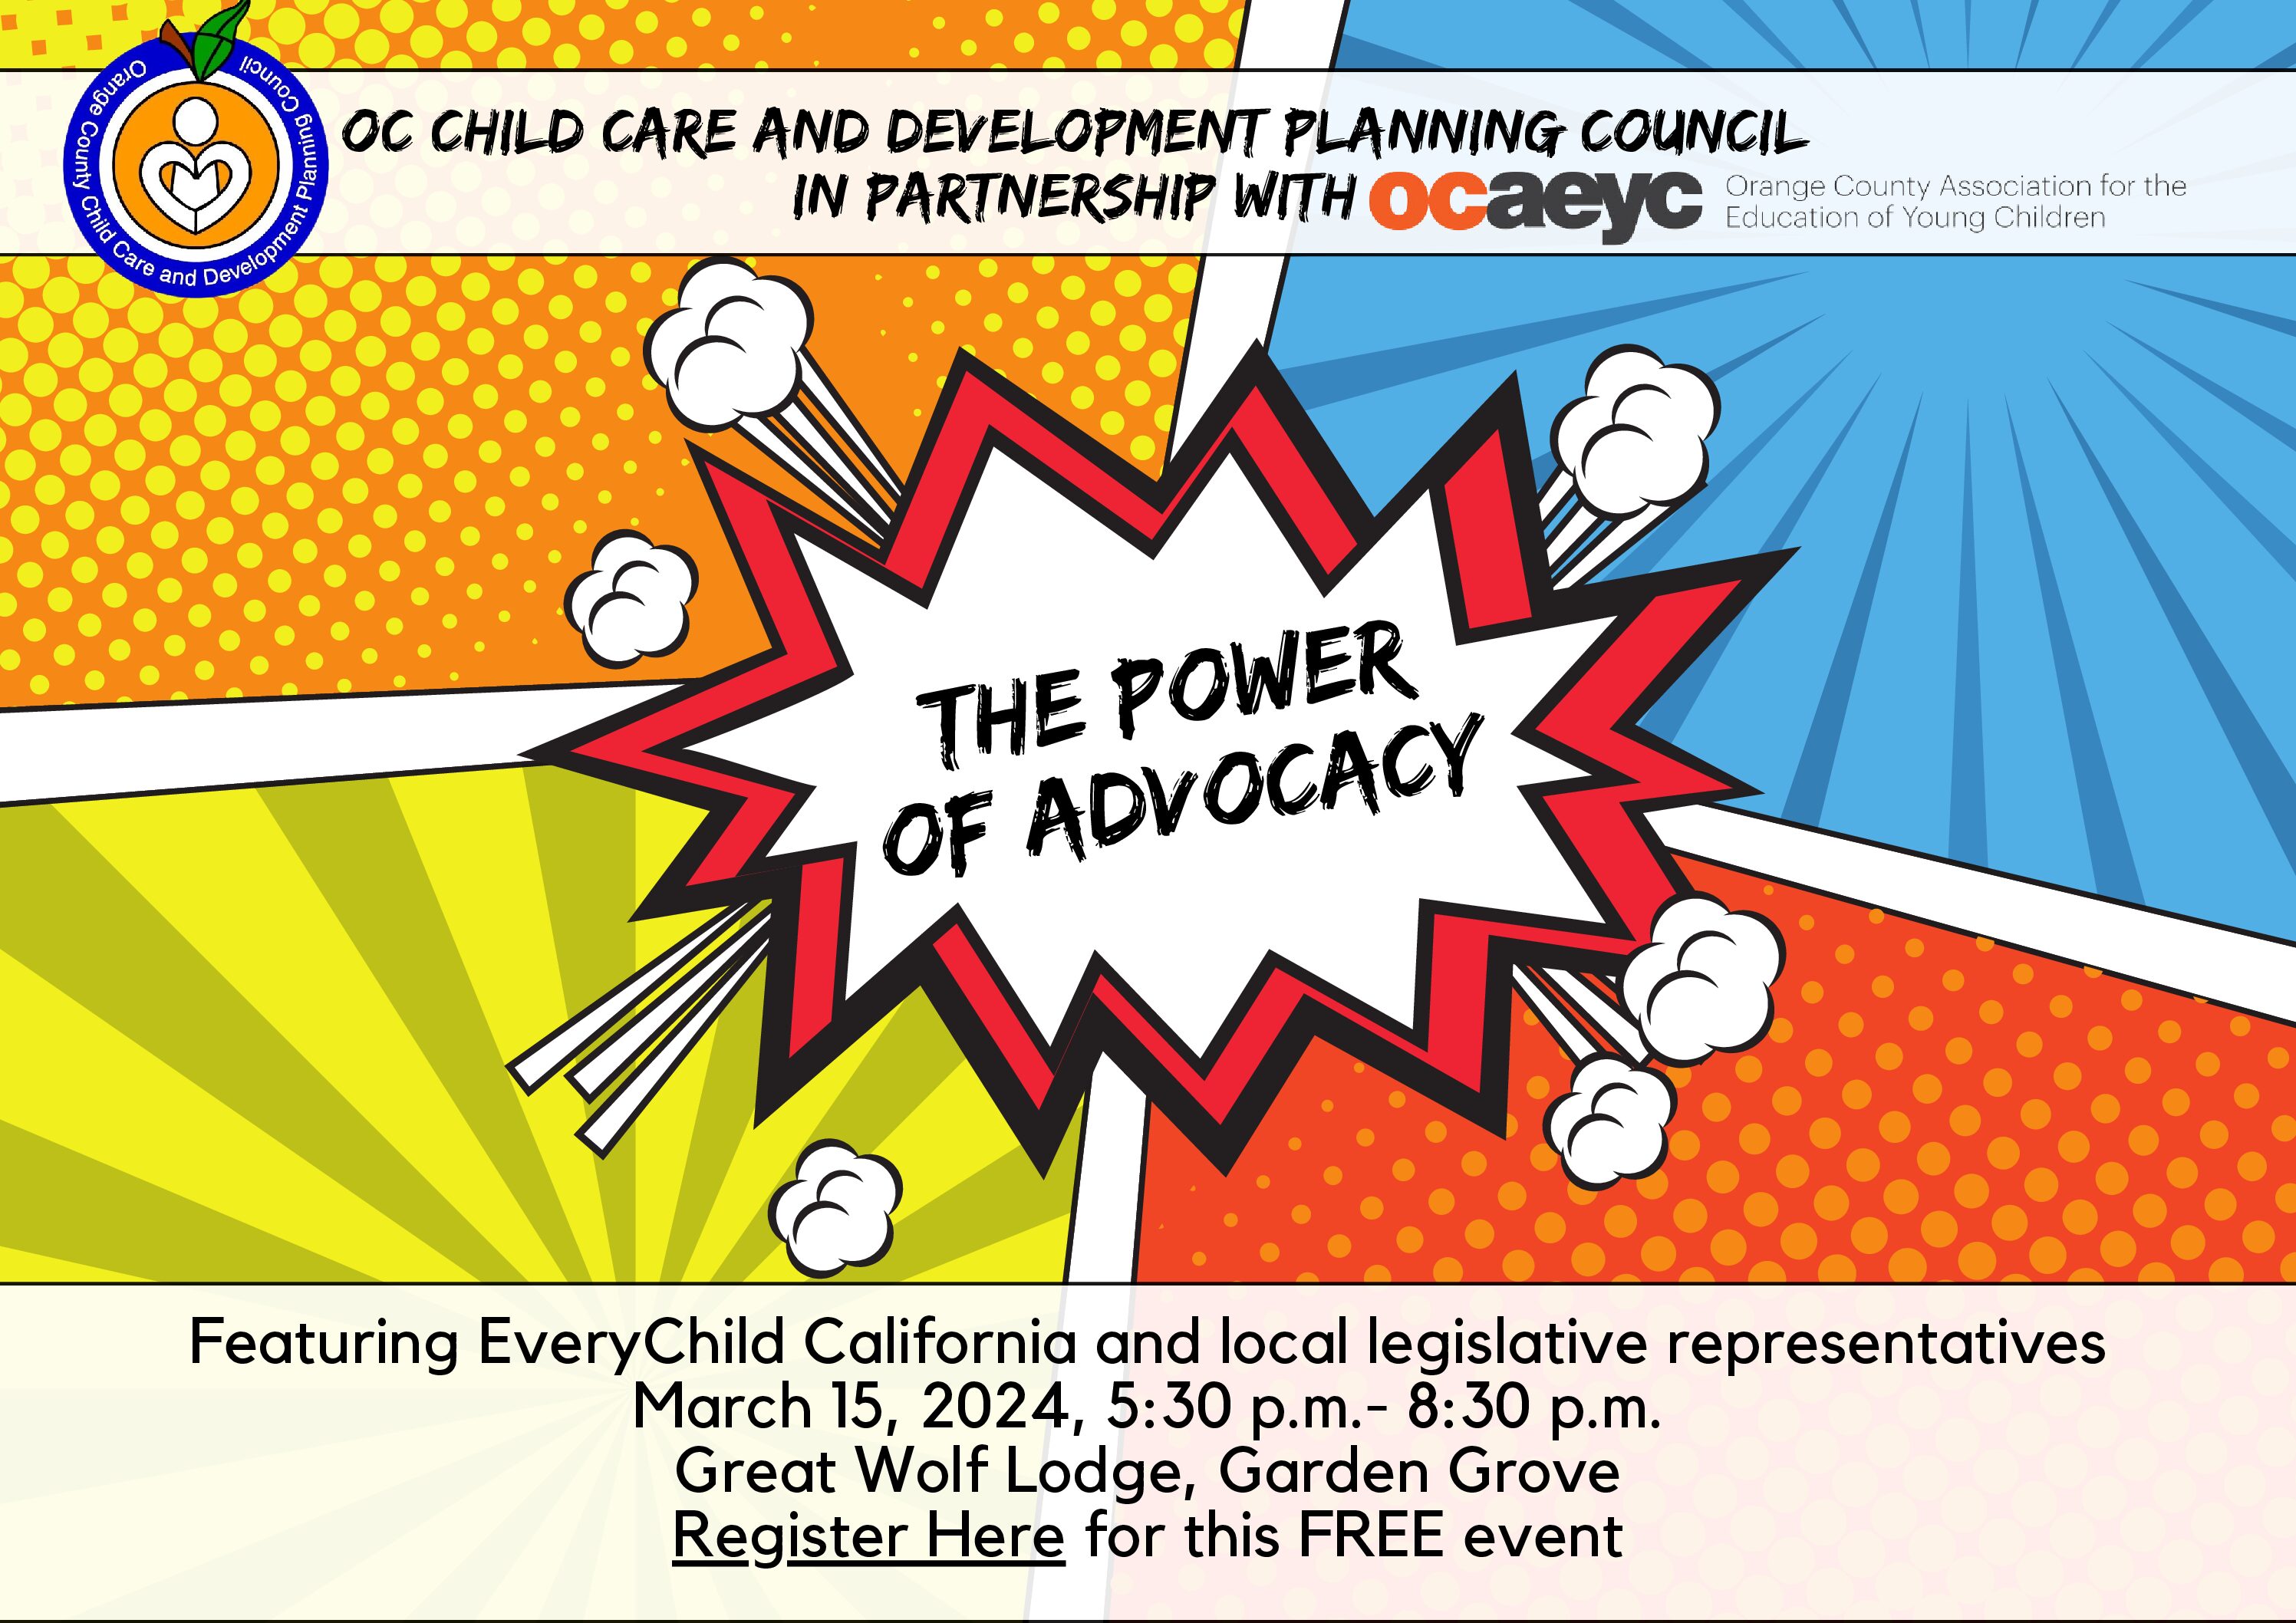 Early childhood educators invited to The Power of Advocacy event on March 15